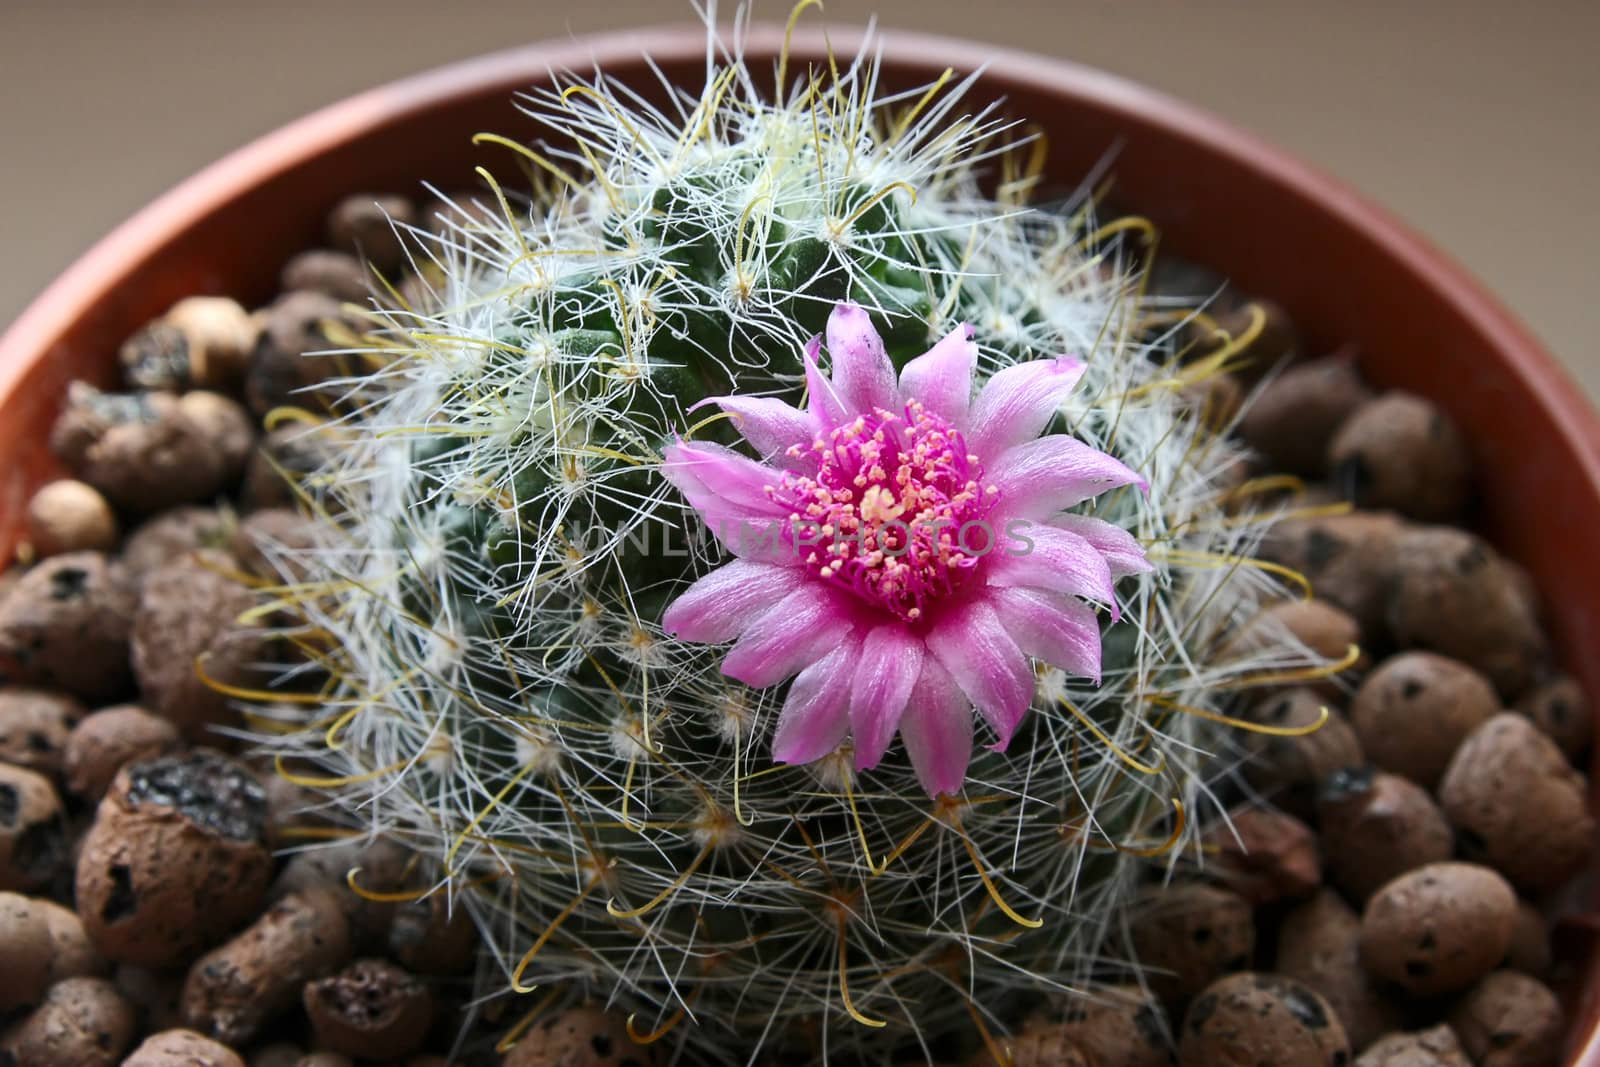 Blooming cactus on dark background (Mammillaria).Image with shallow depth of field.